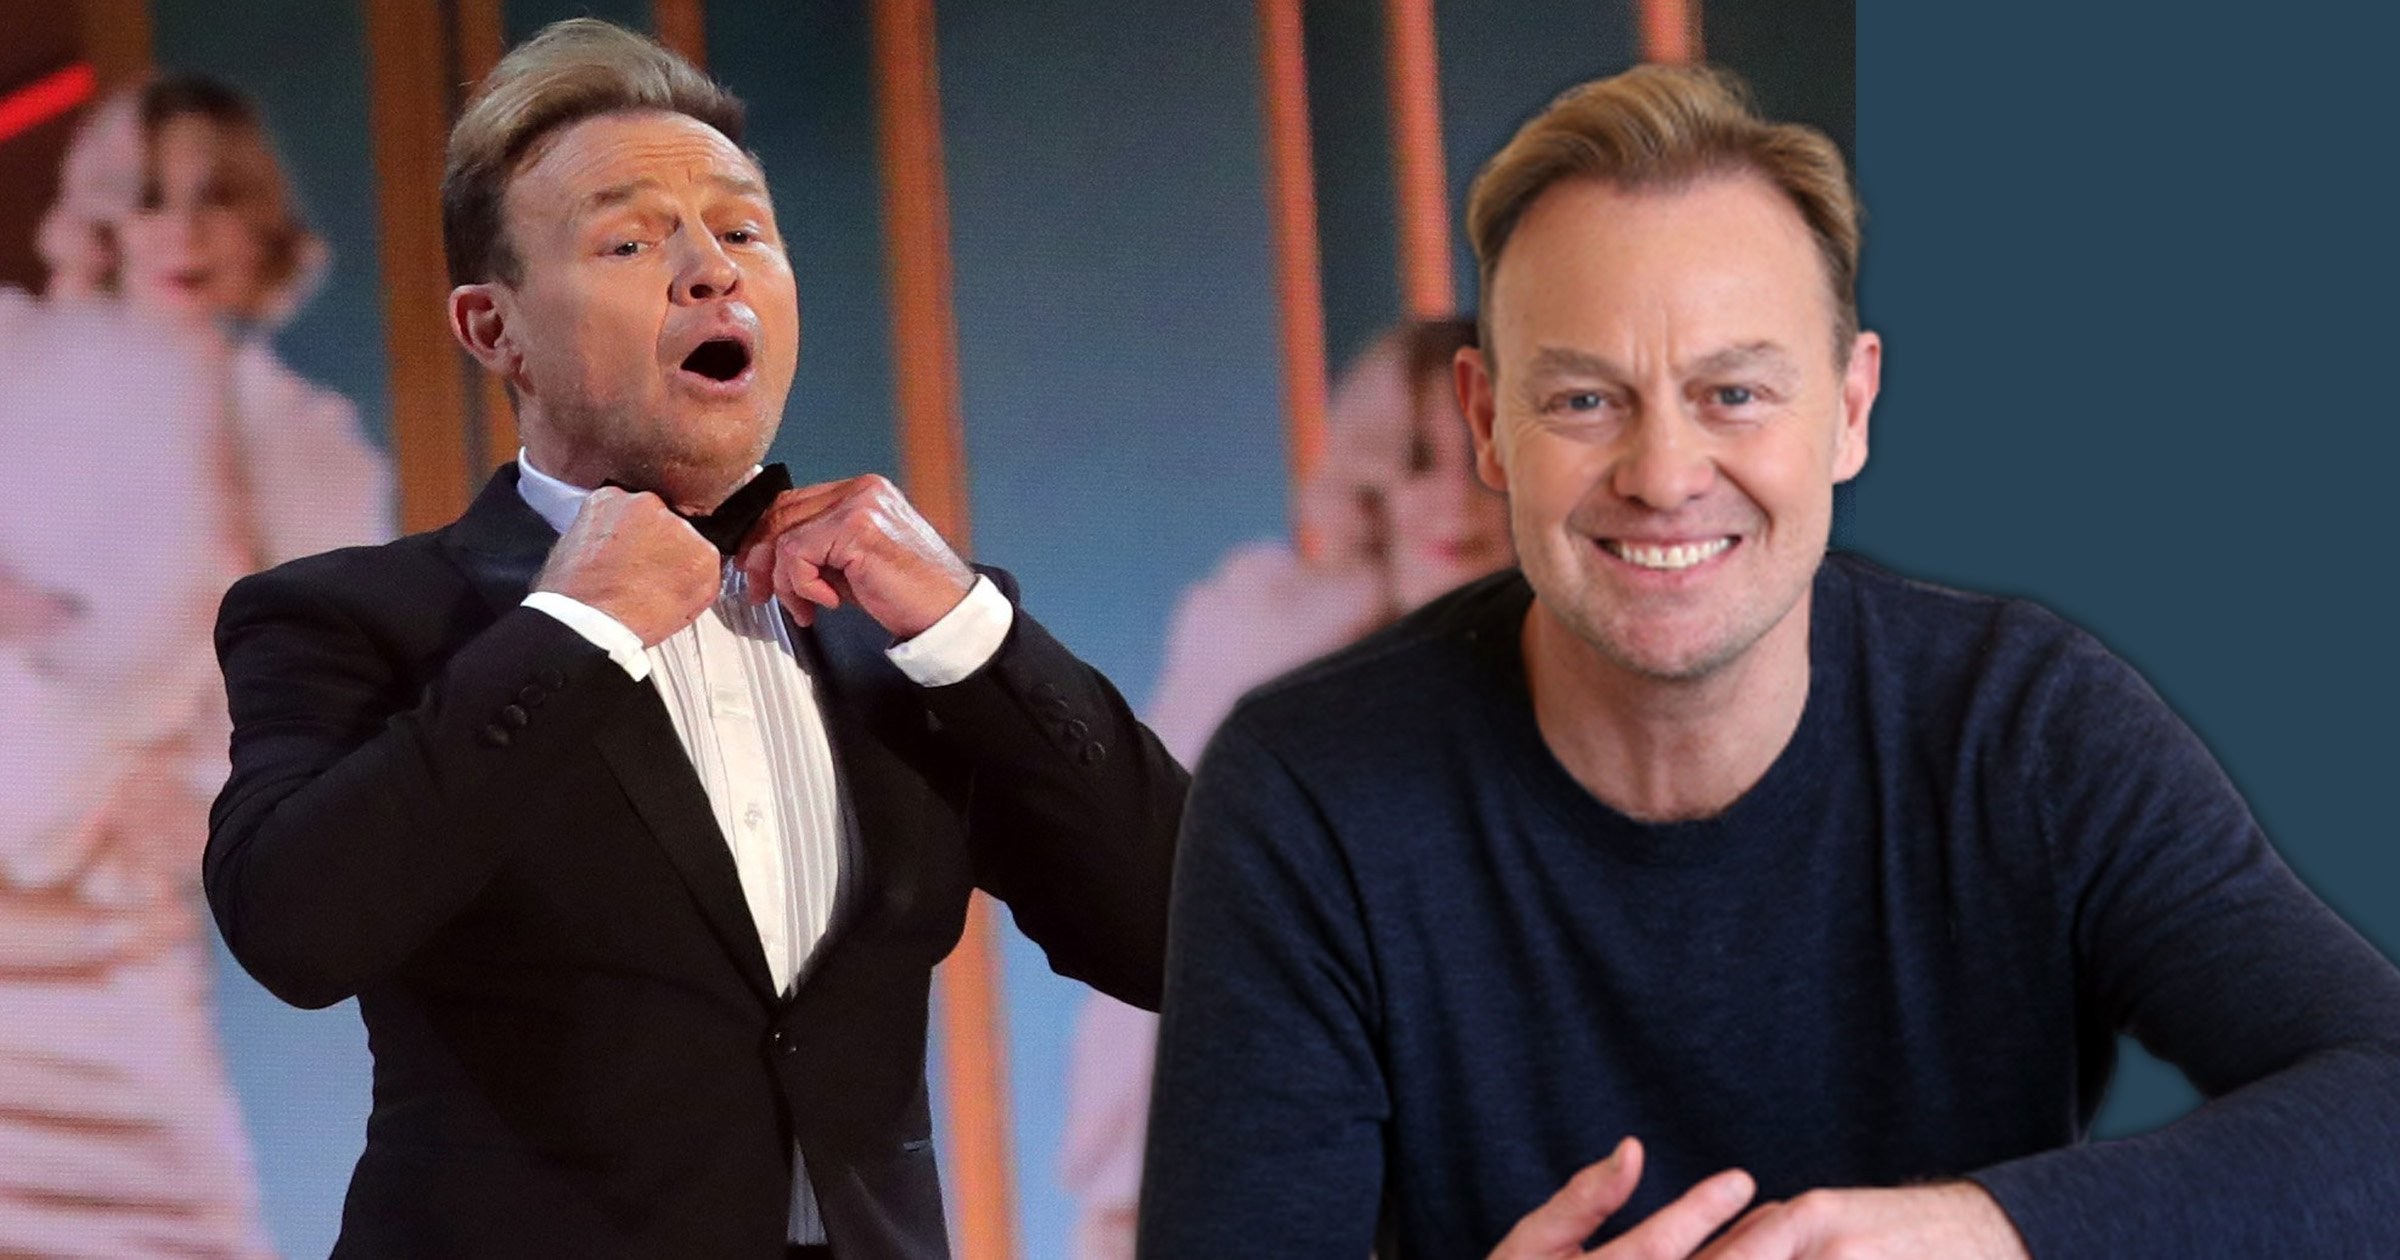 Dancing on Ice 2021: Jason Donovan won’t be taking risks in case he can’t work